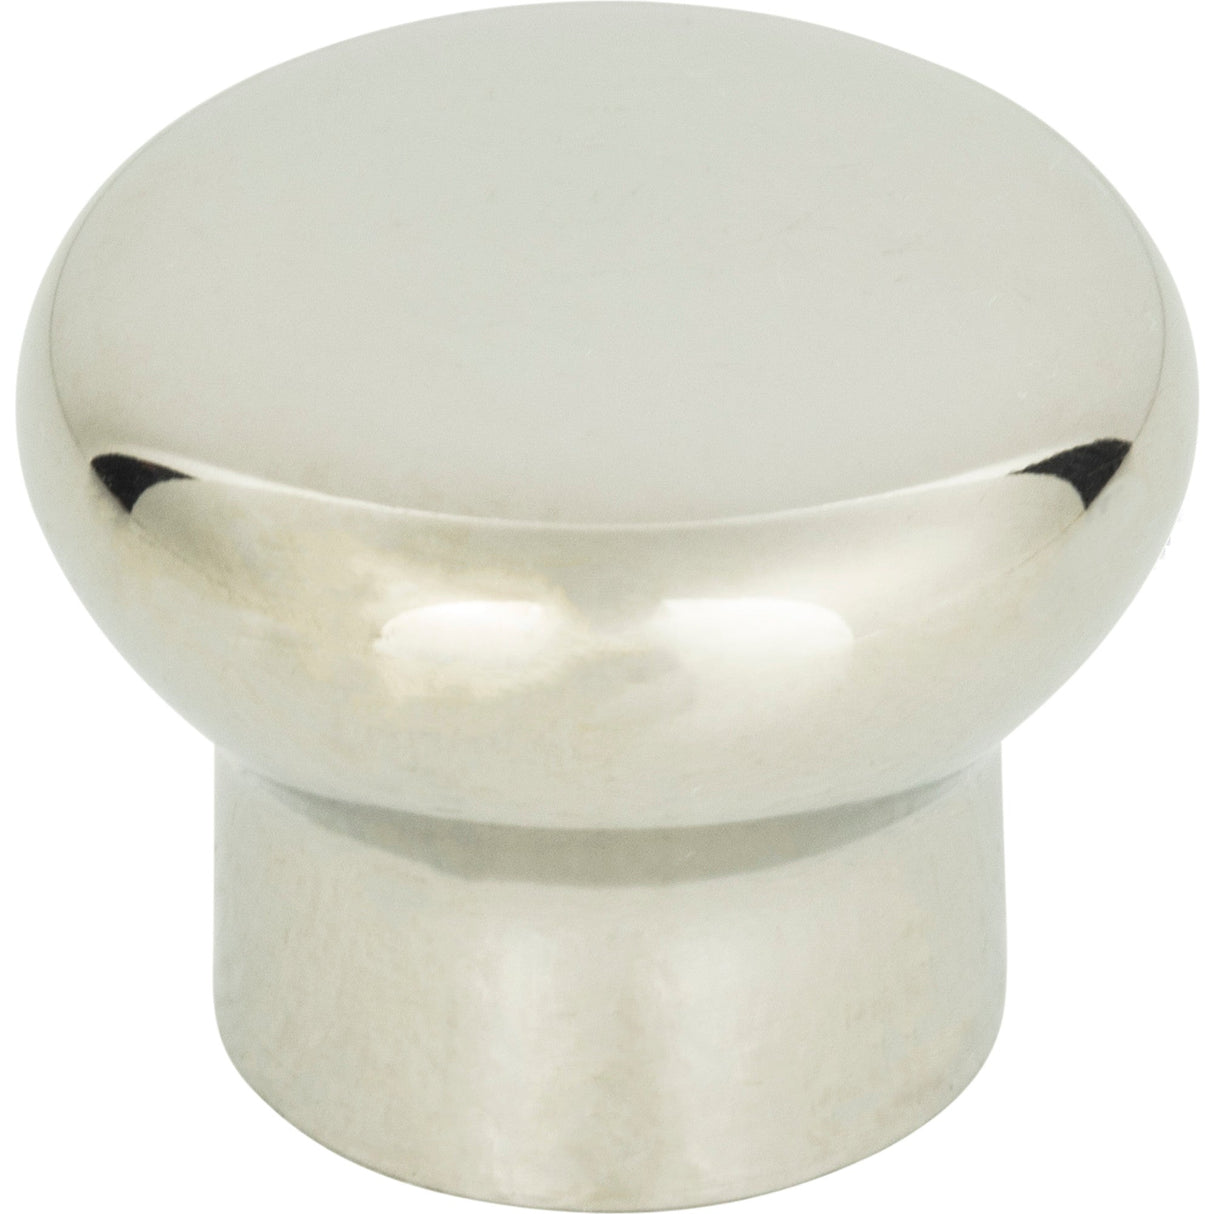 Atlas Homewares Round Knob 1 1/4 Inch Polished Stainless Steel